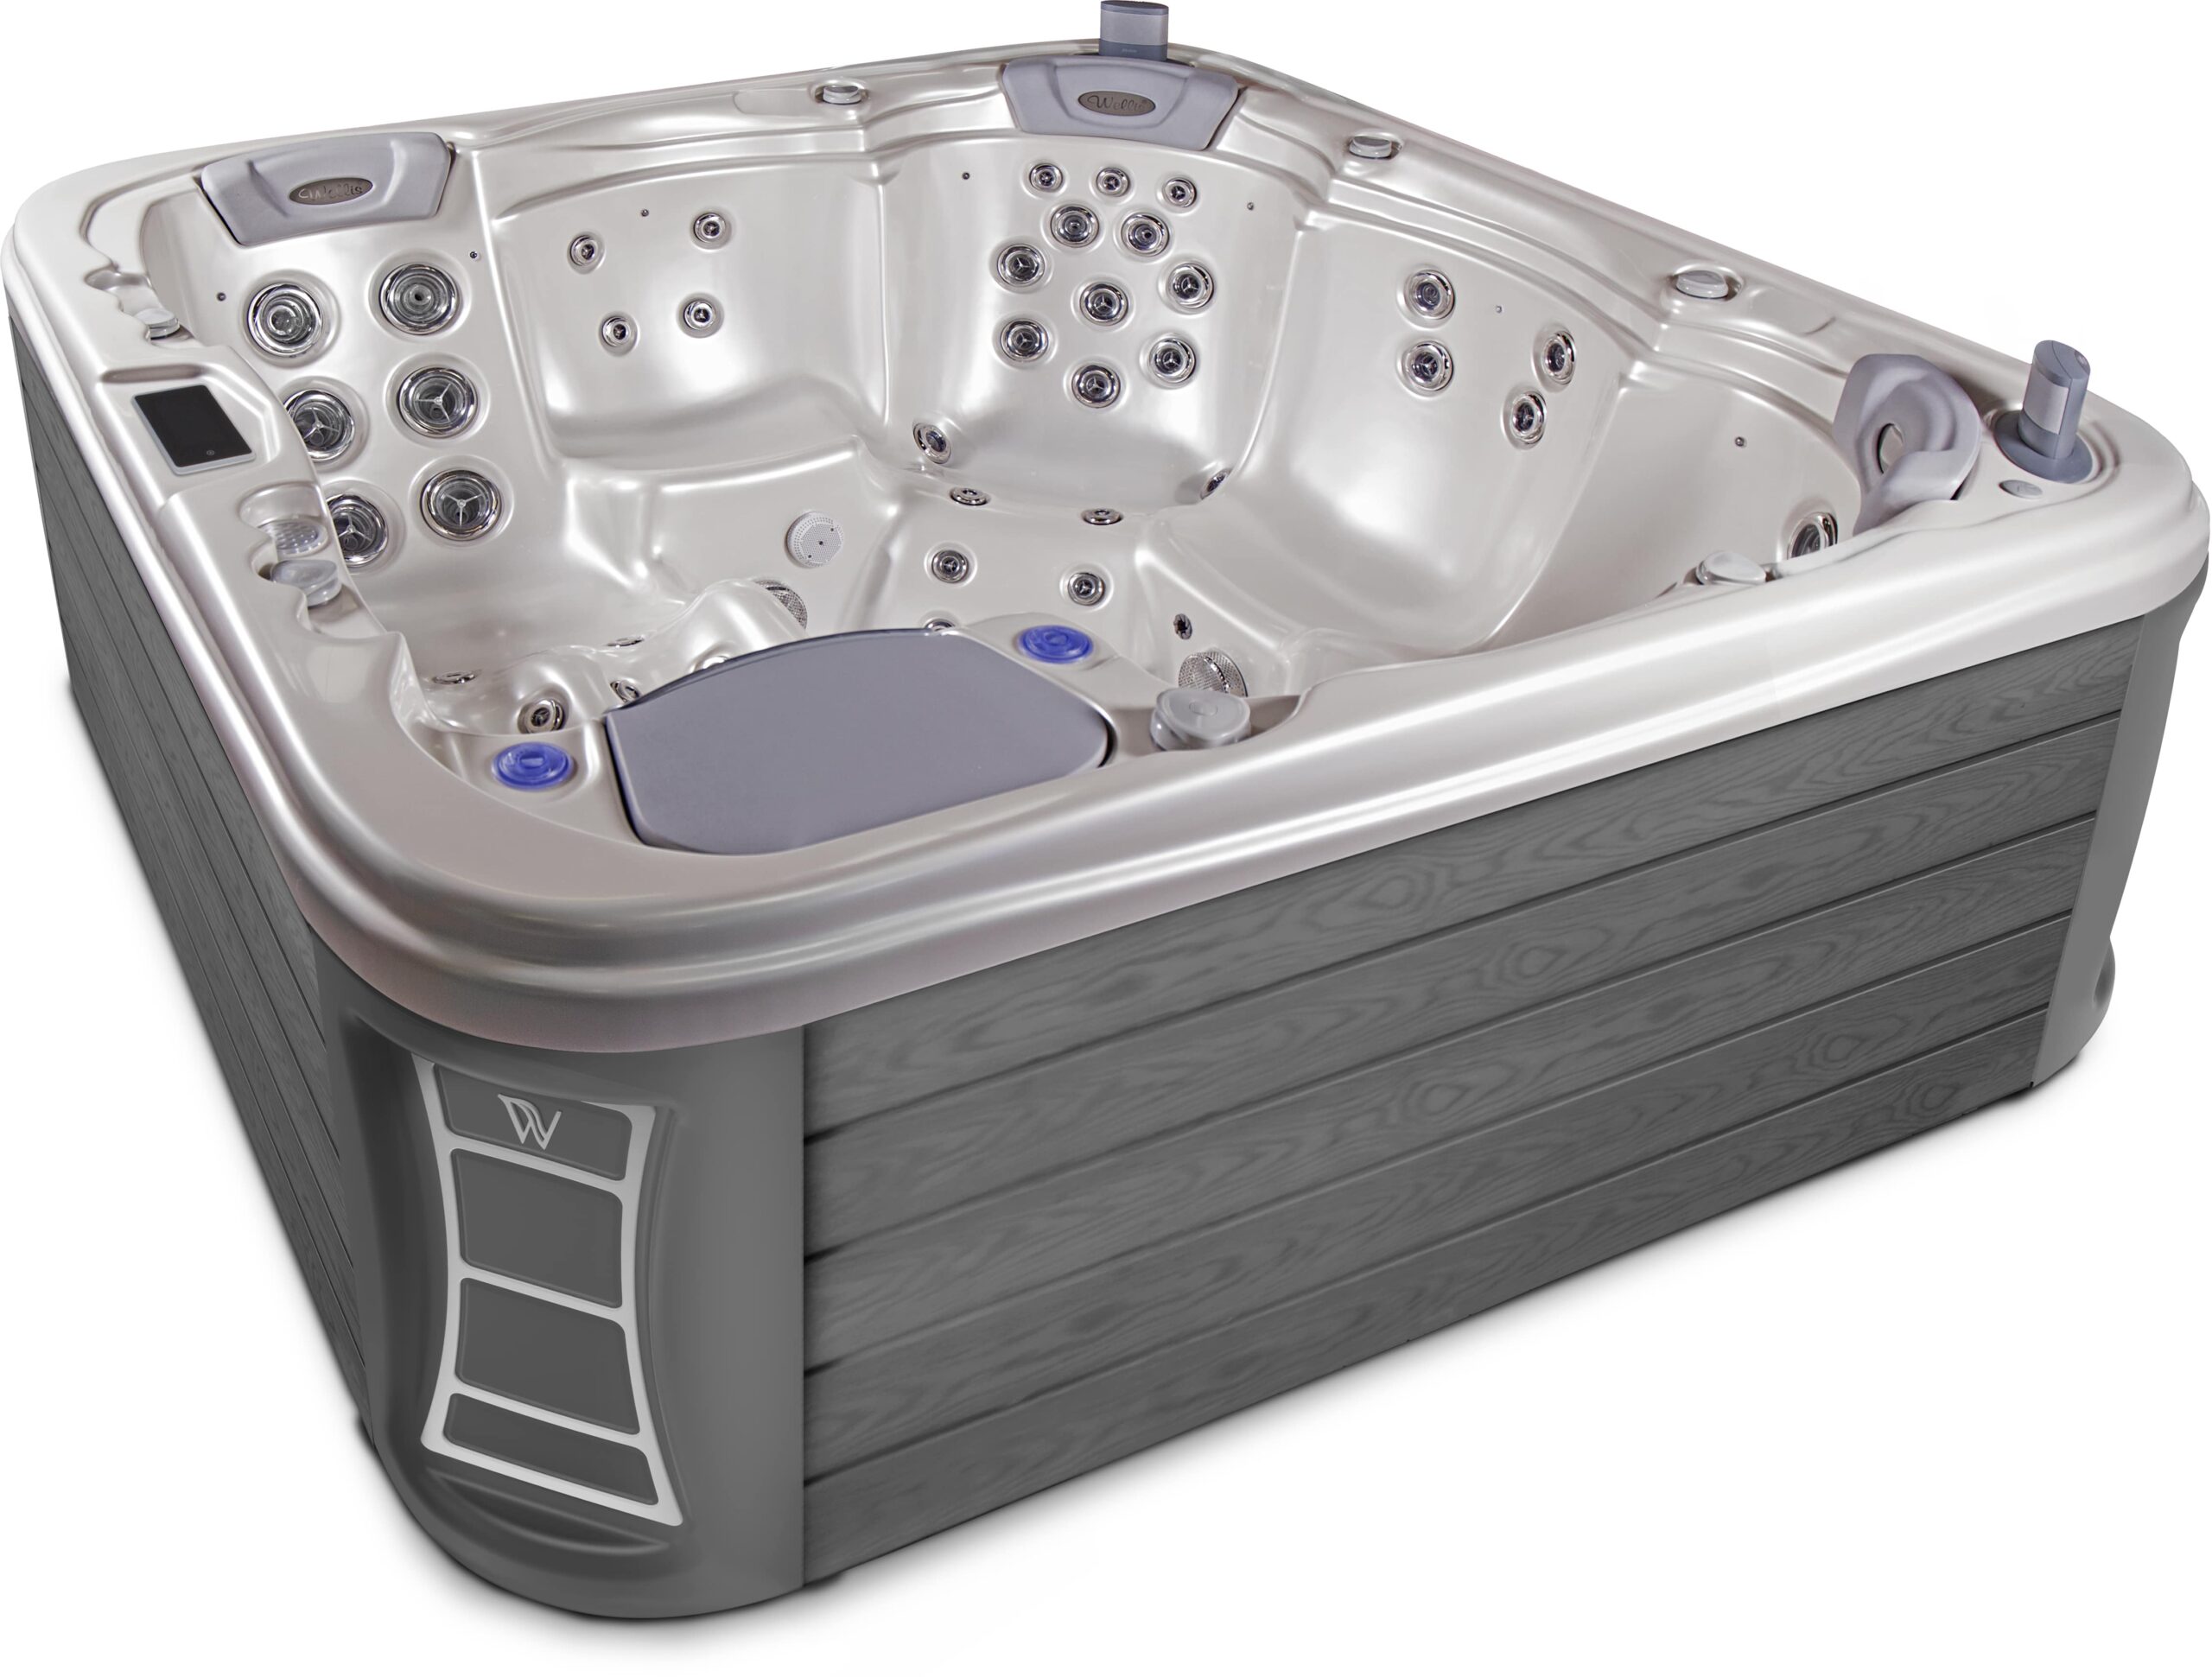 Large hydrotherapy hot tub